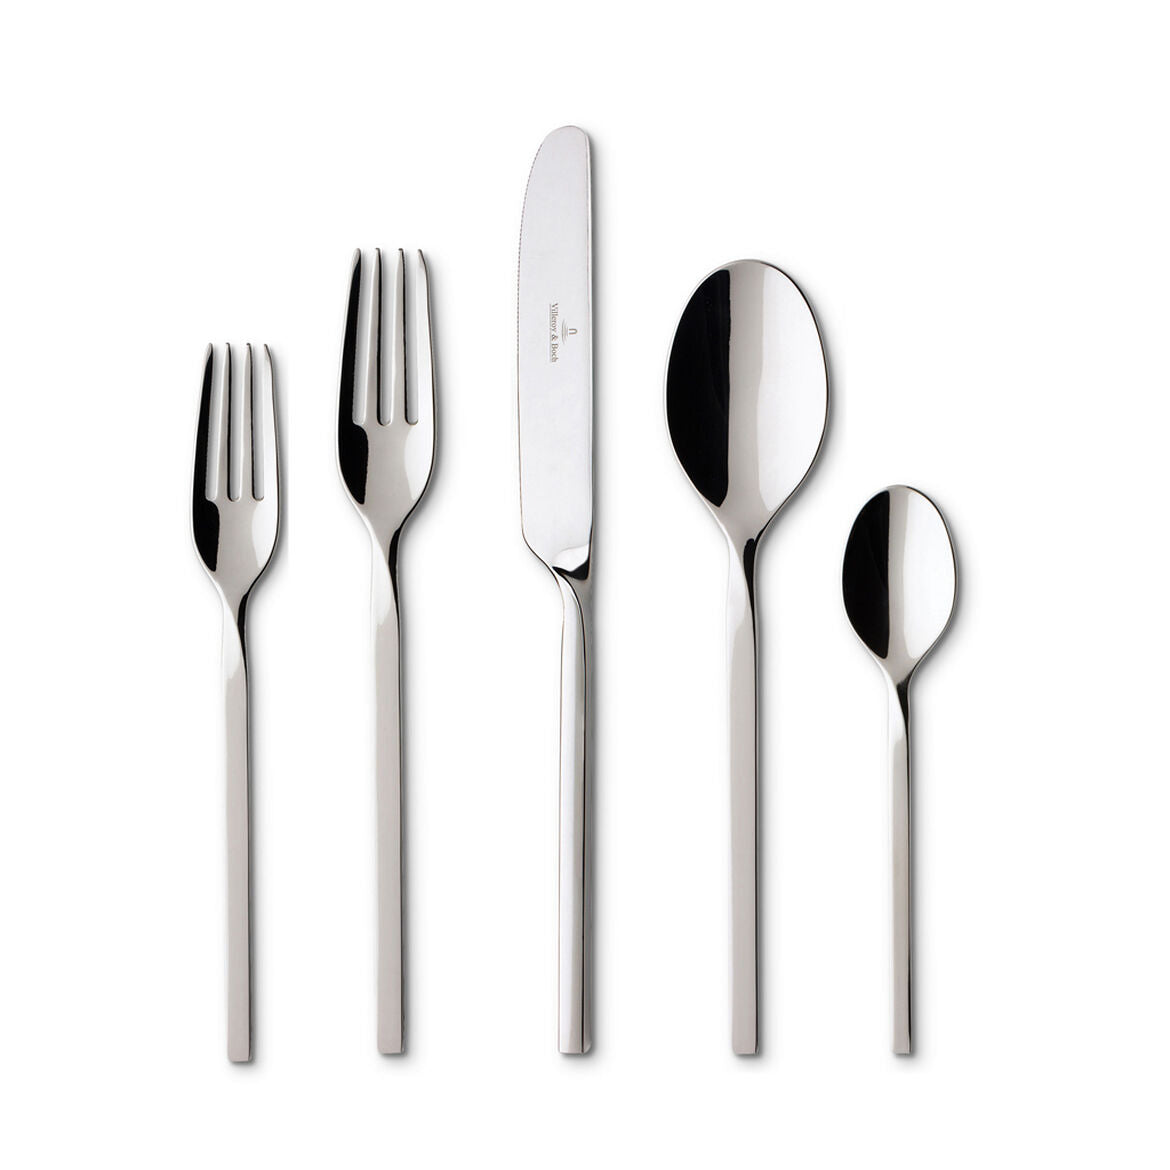 Villeroy-Boch, New Wave Flatware, 18/10 Stainless Steel 5 Piece Set, Service For 1